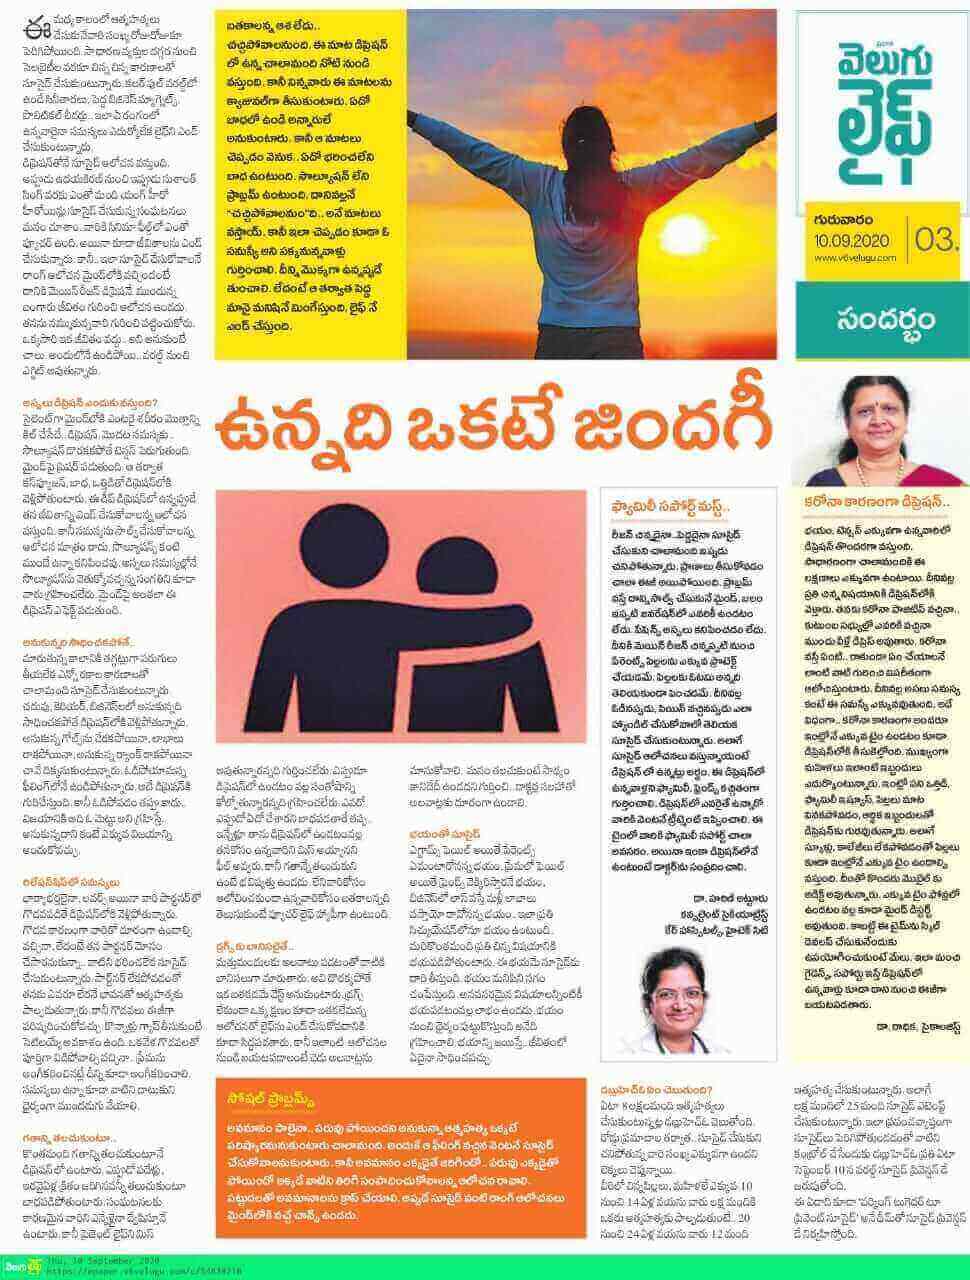 Article on the occasion of World Suicide Prevention Day By Dr. Harini Consultant Psychiatrist